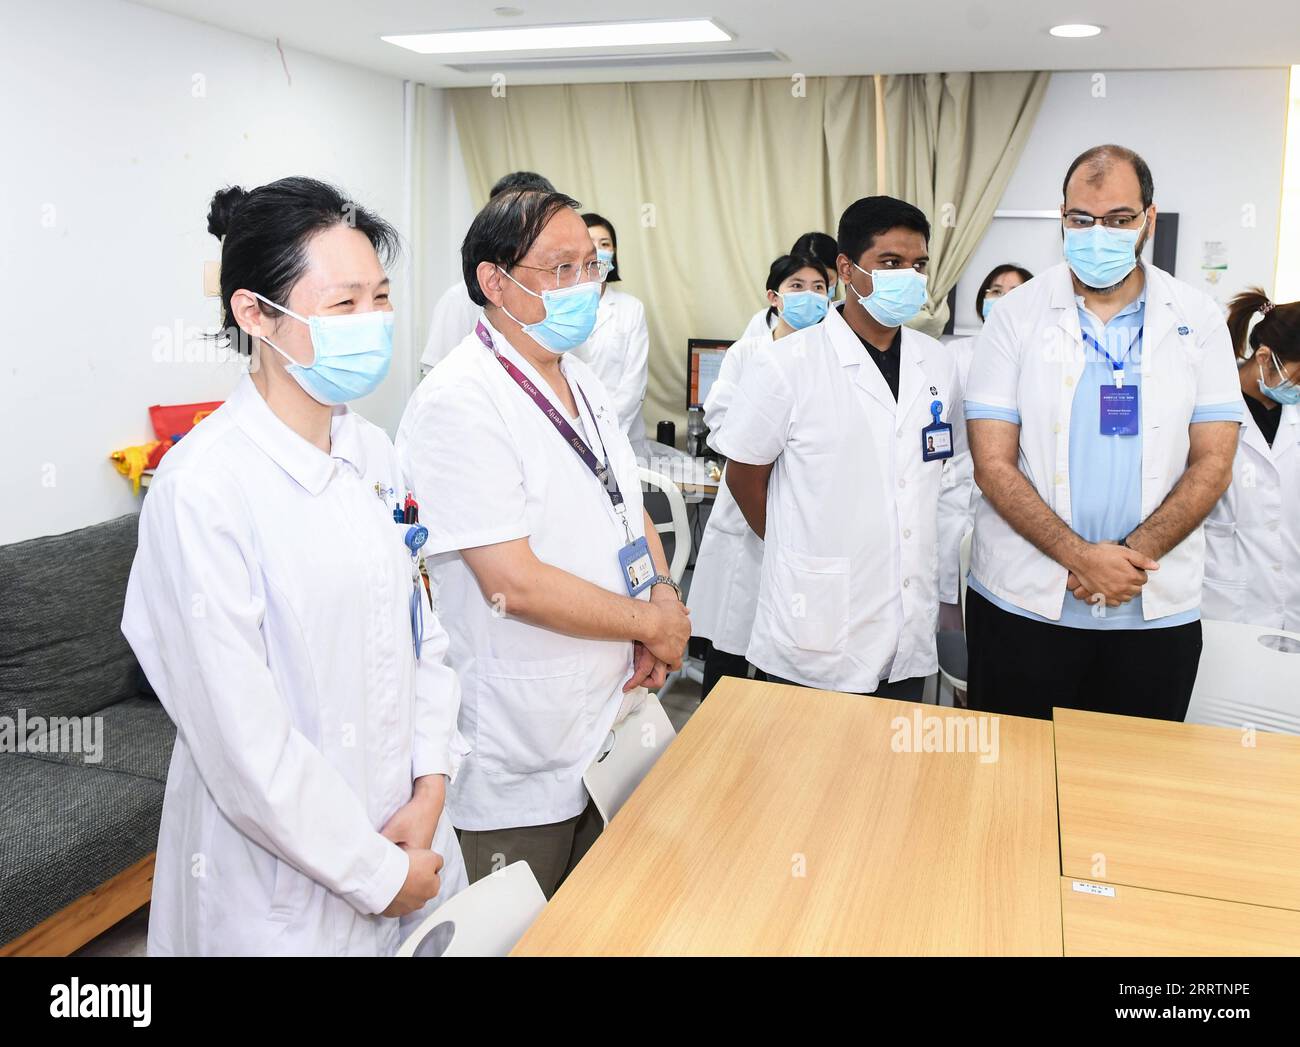 230803 -- NANJING, Aug. 3, 2023 -- Fan Zhining 2nd L, expert of digestive endoscopy, attends a morning session with foreign medical workers of a medical seminar at Jiangsu Province Hospital in Nanjing, capital of east China s Jiangsu Province, Aug. 1, 2023. In recent years, Jiangsu Province Hospital cooperated with medical institutions in Pakistan, Egypt and other countries and regions in the field of digestive endoscopy to promote medical cooperation under the Belt and Road Initiative.  CHINA-JIANGSU-DIGESTIVE ENDOSCOPY-INTERNATIONAL COOPERATION CN JixChunpeng PUBLICATIONxNOTxINxCHN Stock Photo